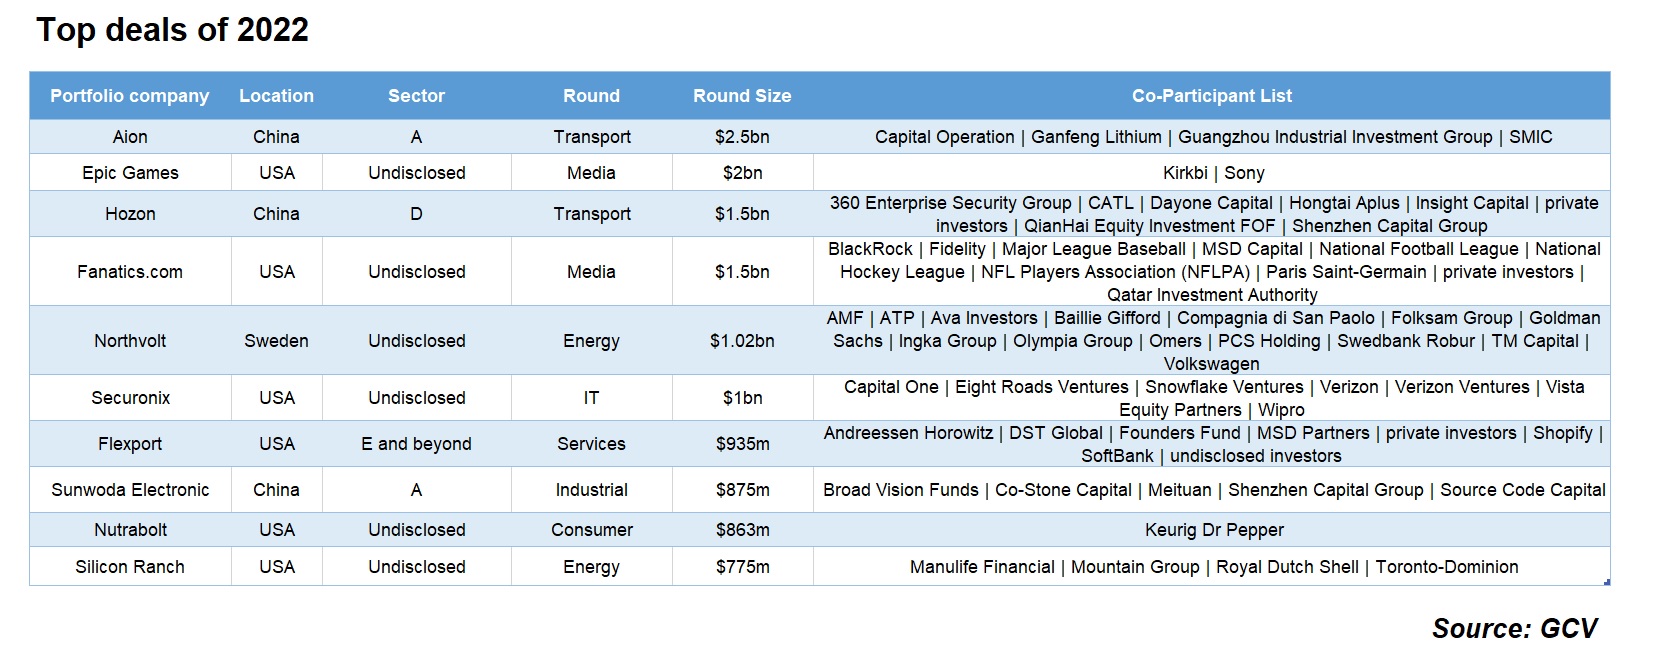 Table showing top corporate-backed deals of 2022 according to GCV data 